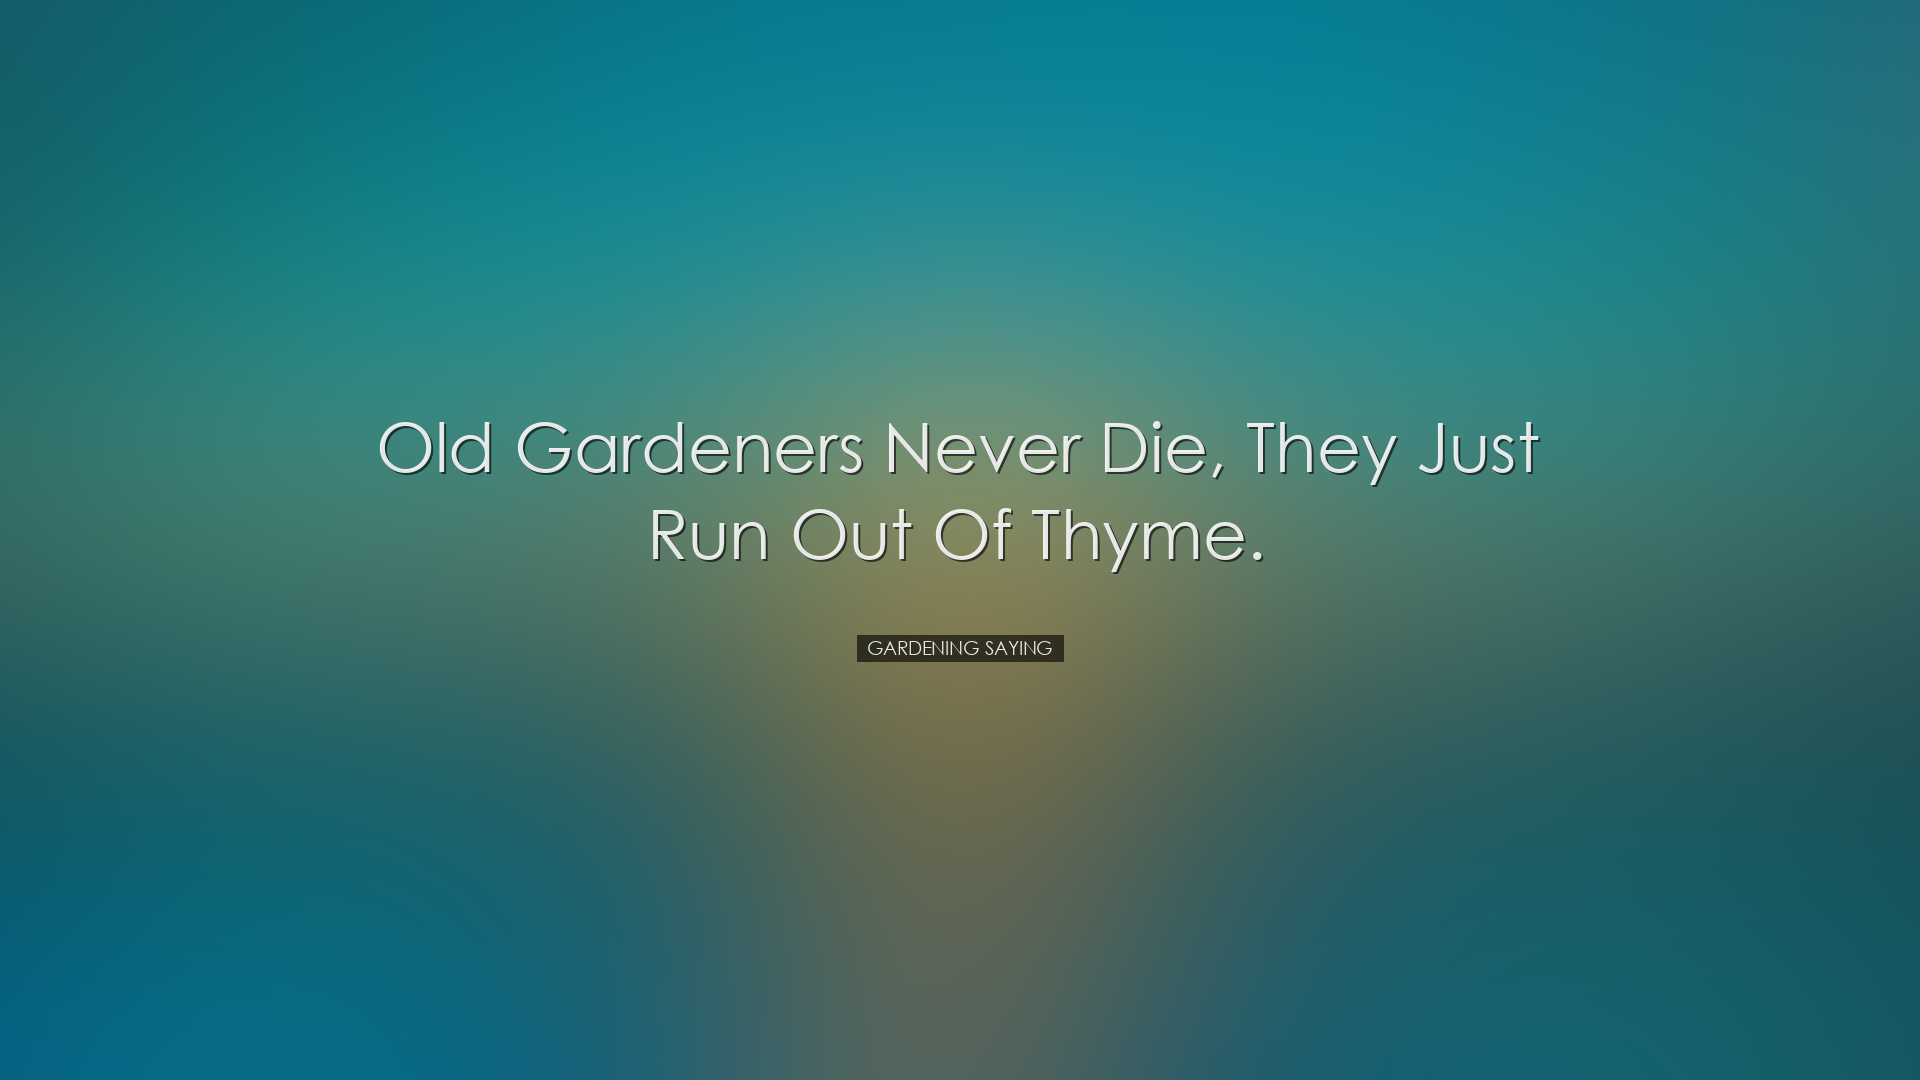 Old gardeners never die, they just run out of thyme. - Gardening S